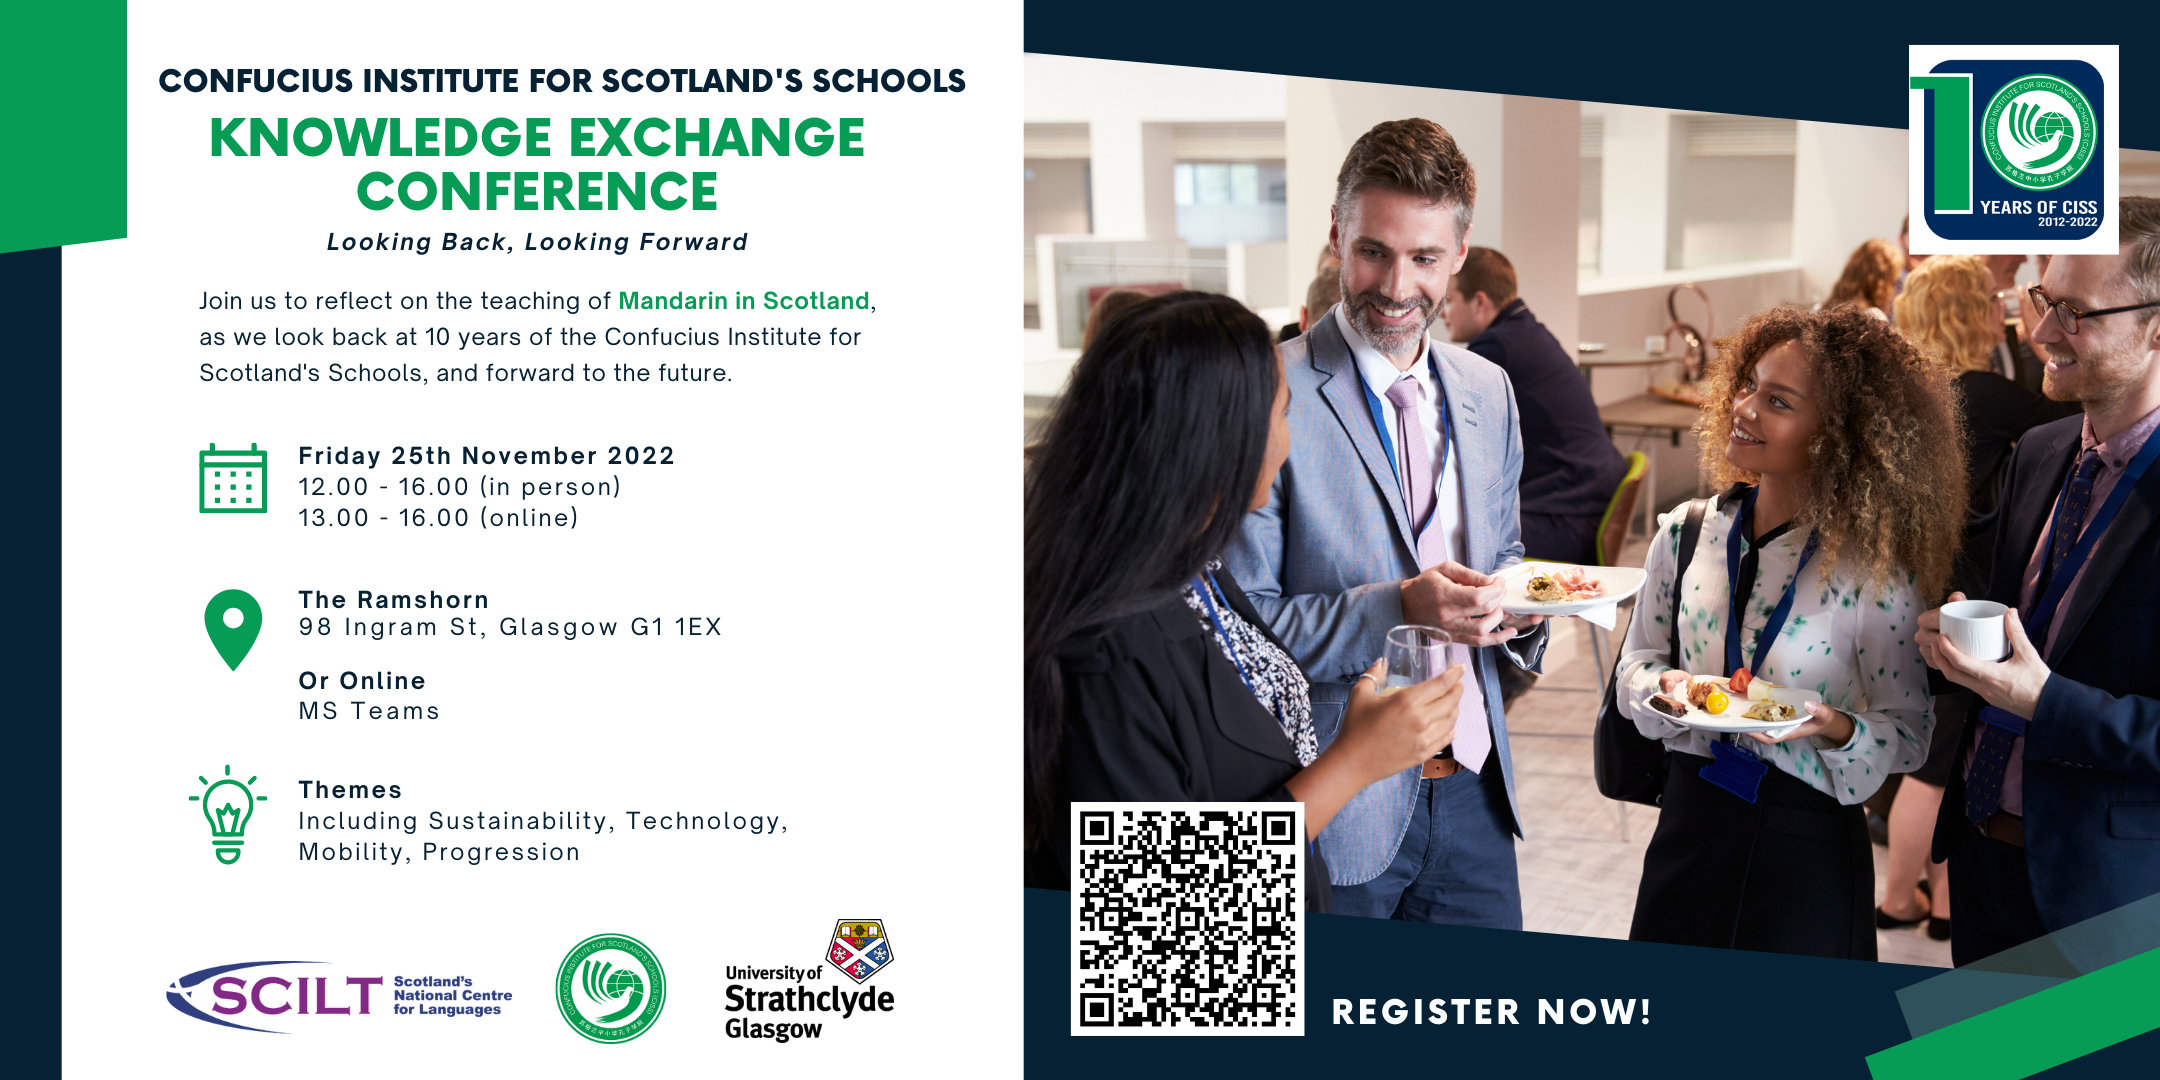 flyer advertising the CISS Knowledge Exchange Event on 25 November 2022